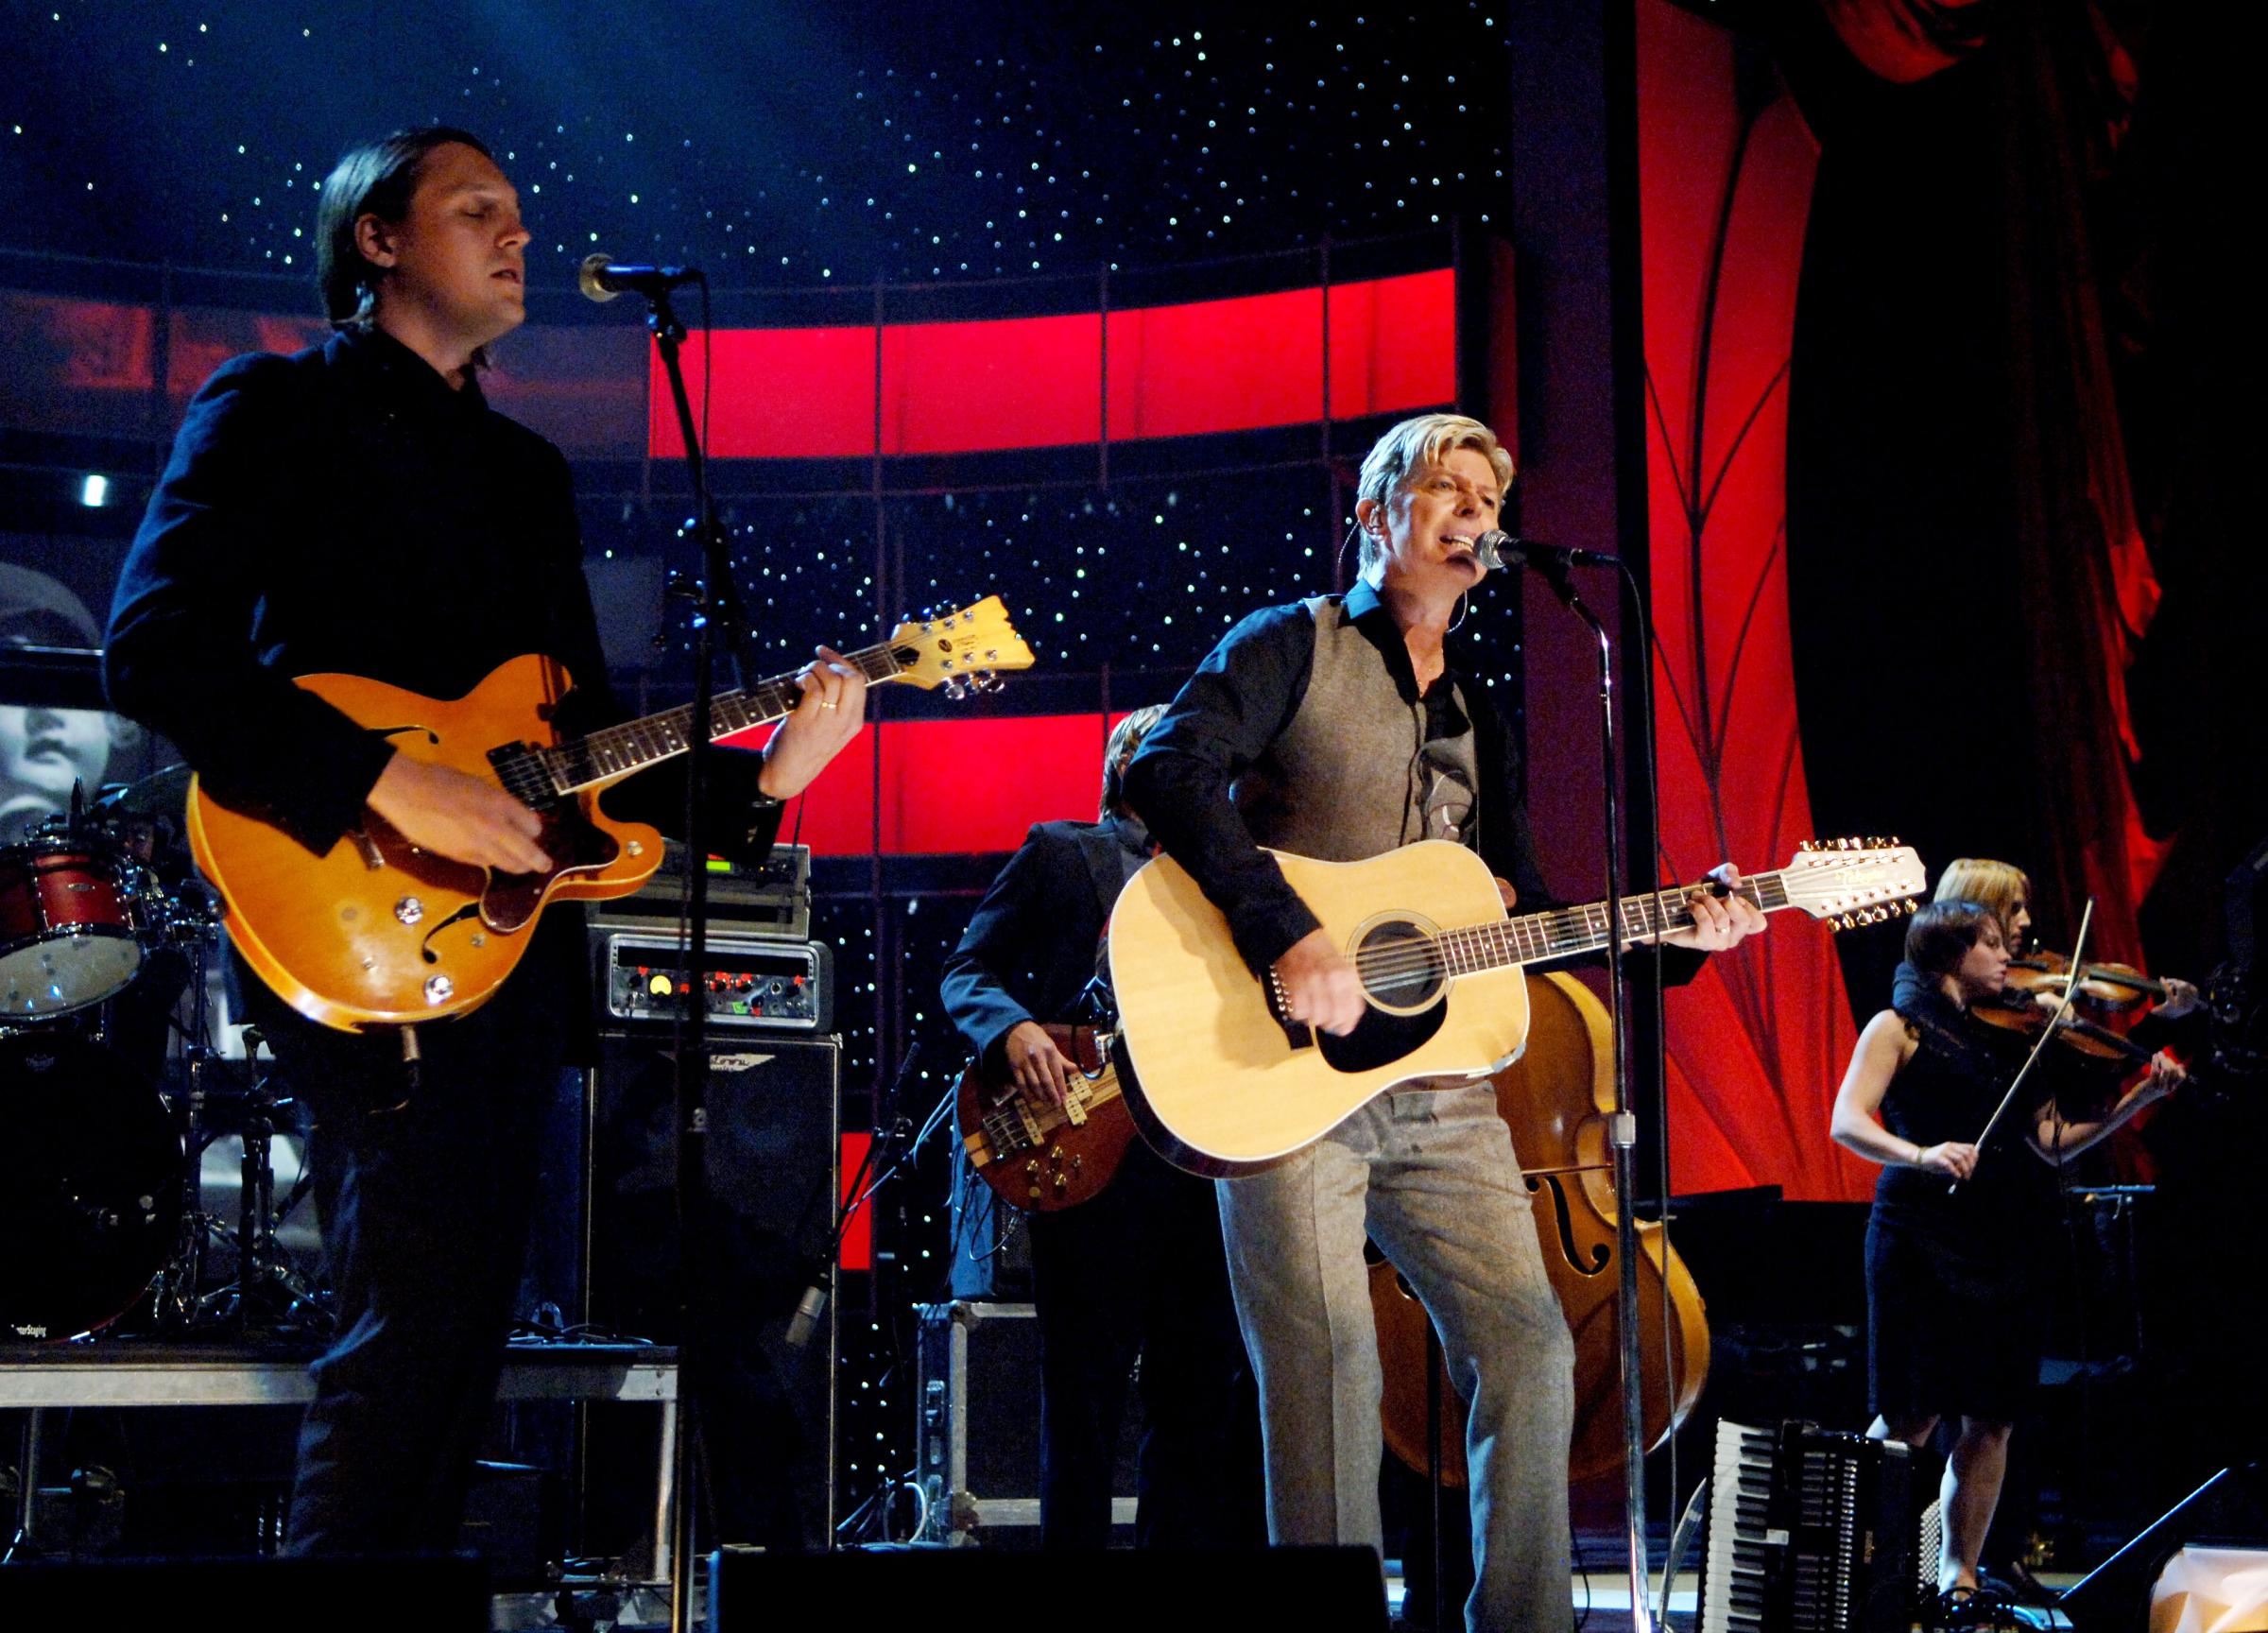 David Bowie performs with Arcade Fire at Conde Nast's 2005 Fashion Rocks Show on Sept. 8, 2005 in New York City.